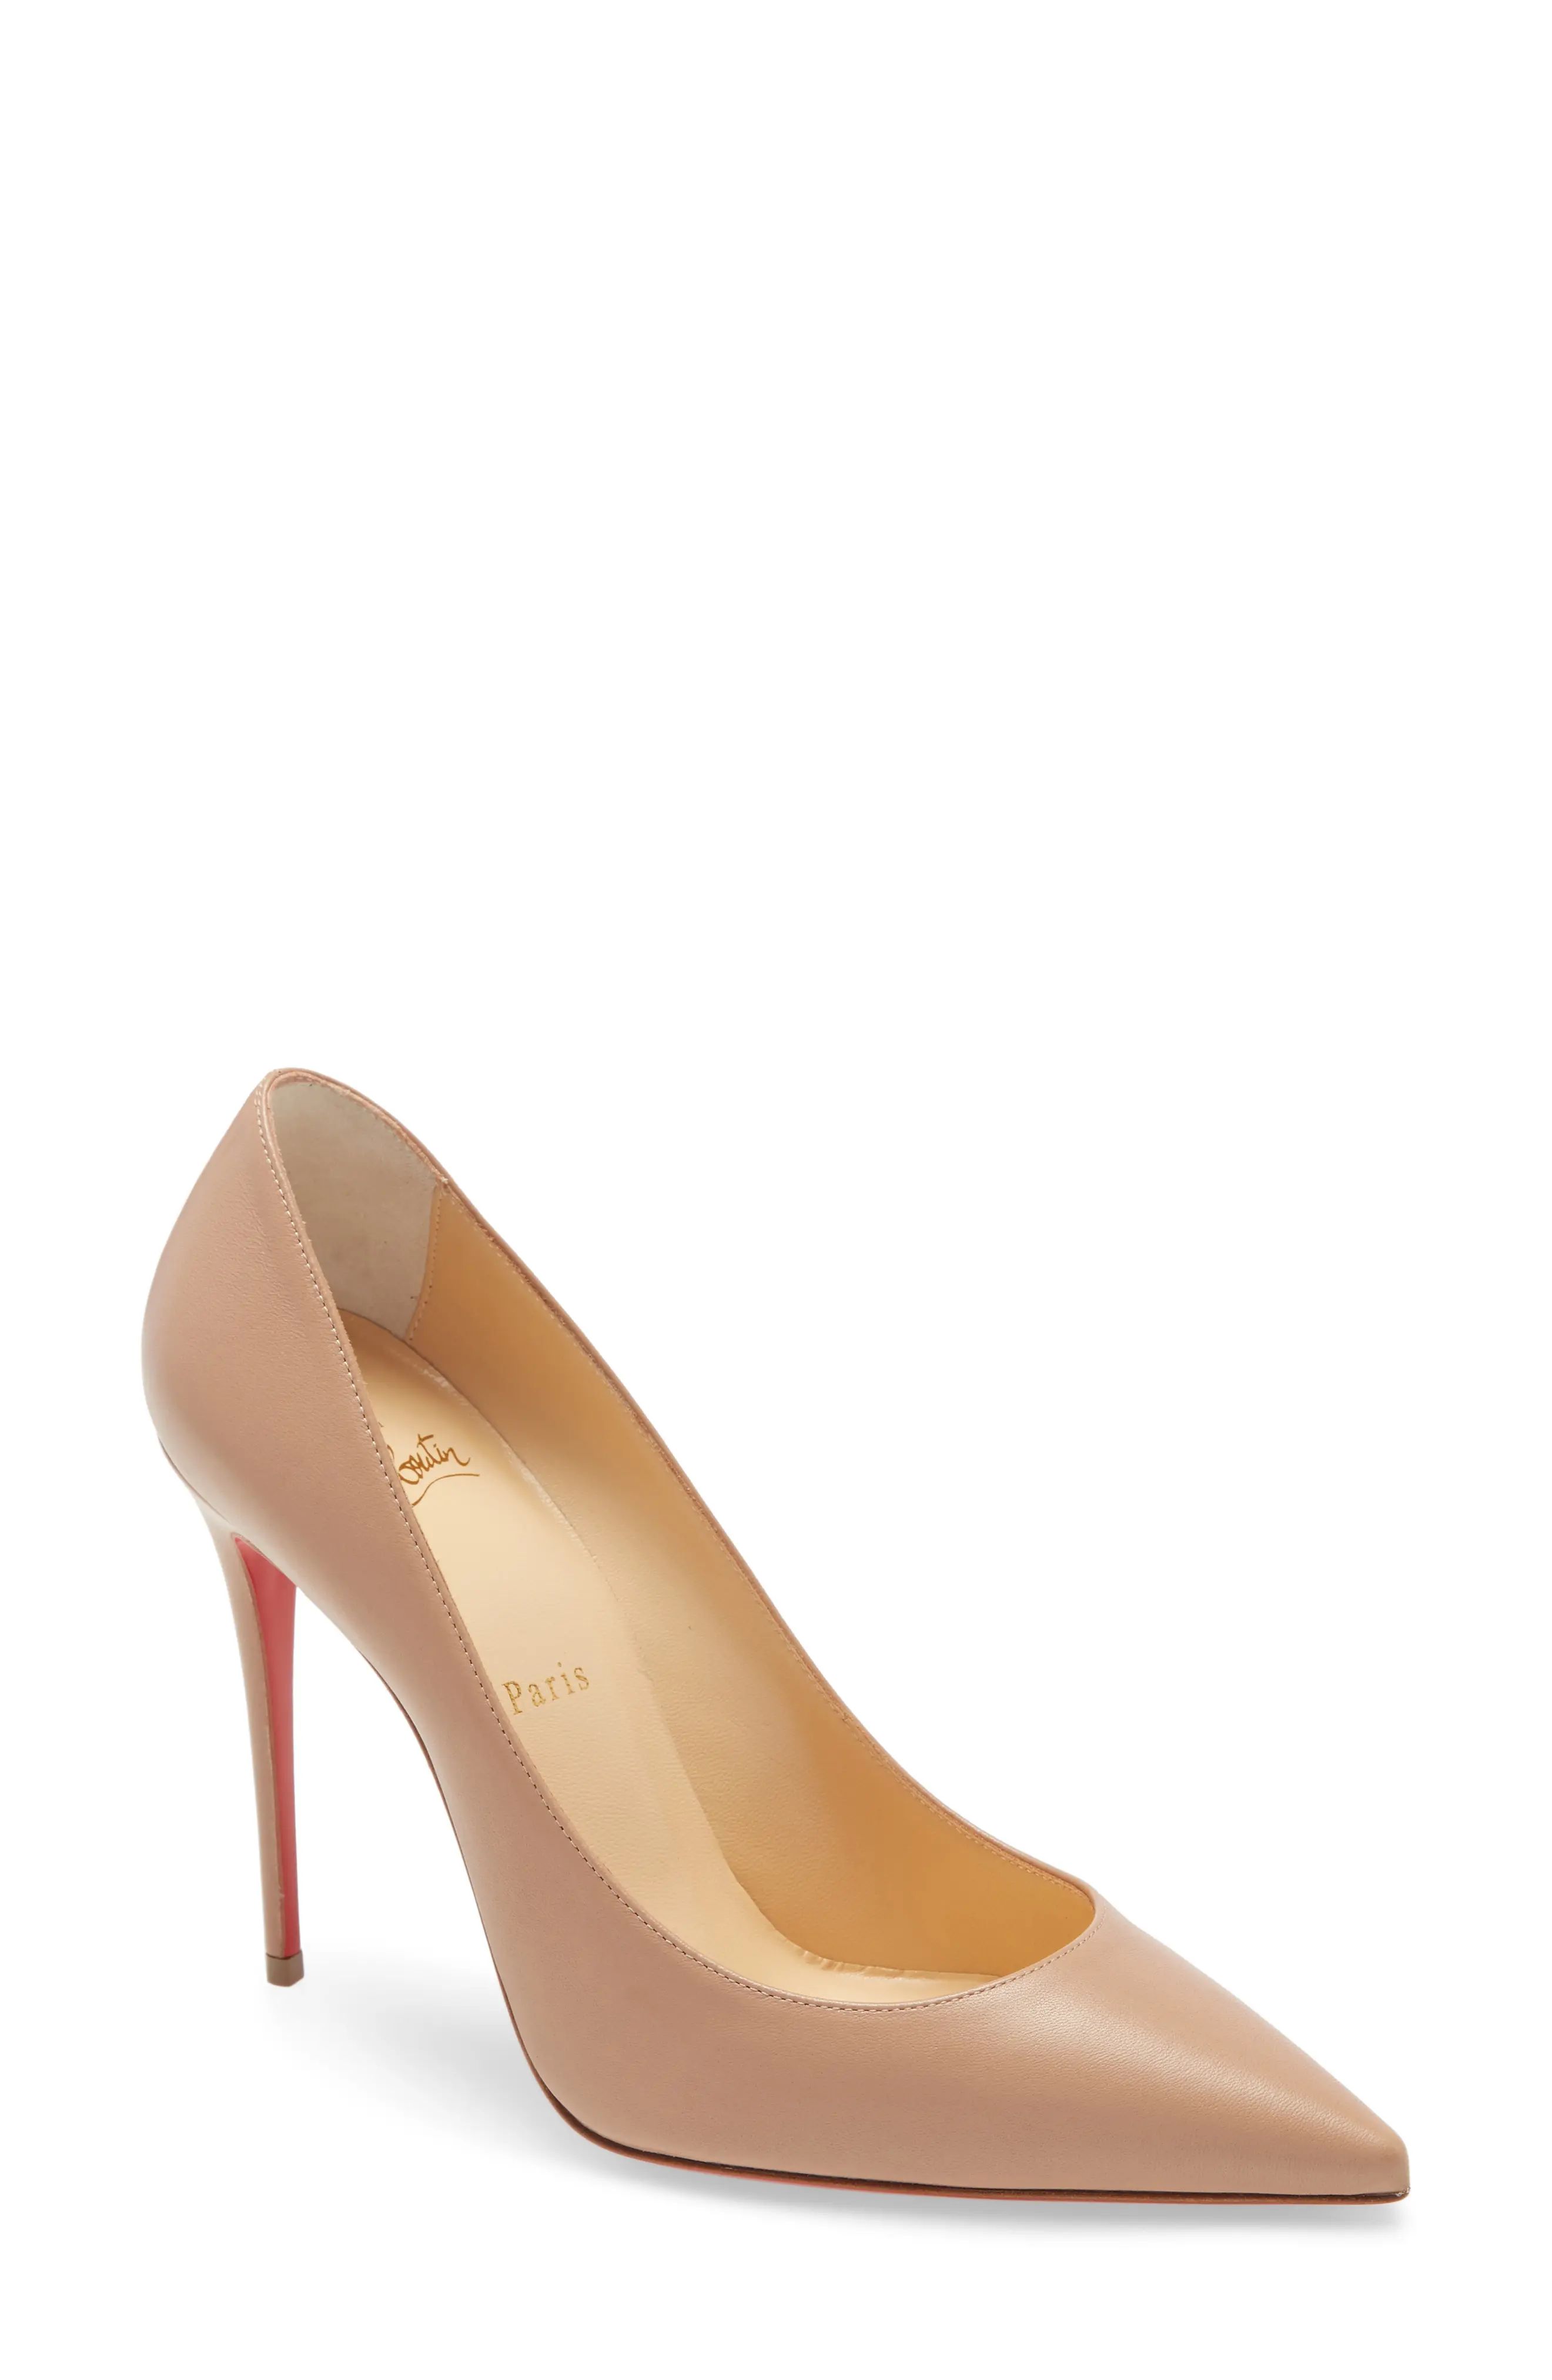 Christian Louboutin 'Decollete' Pointy Toe Pump, Size 8Us in Nude at Nordstrom | Nordstrom